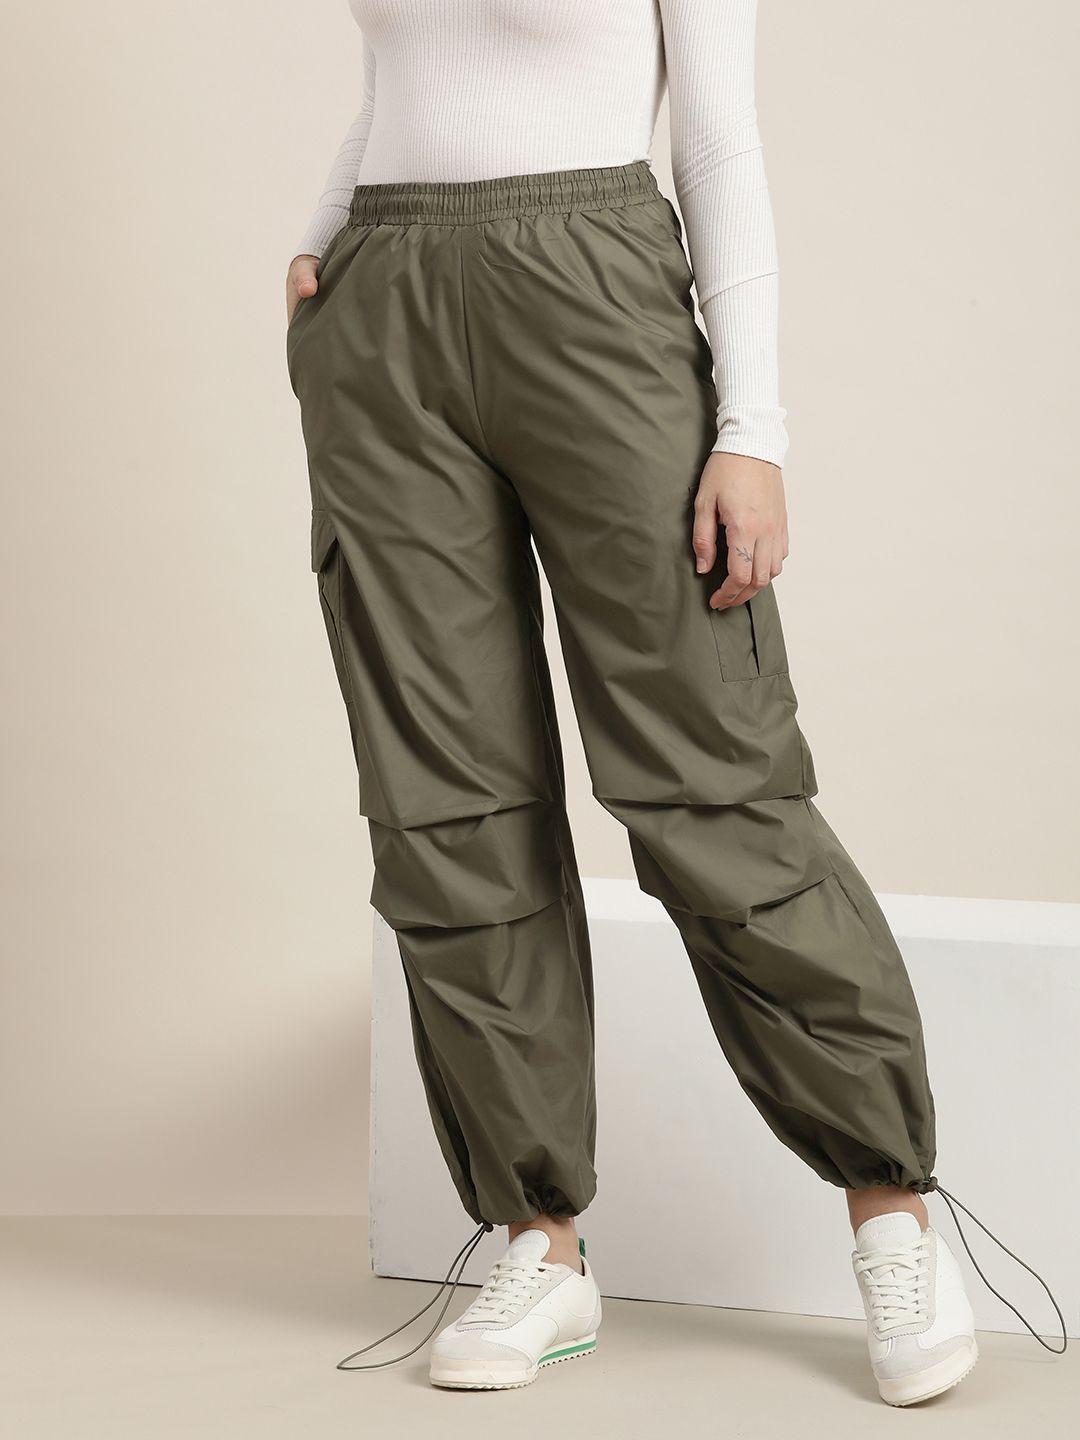 here&now women solid regular fit casual track pants